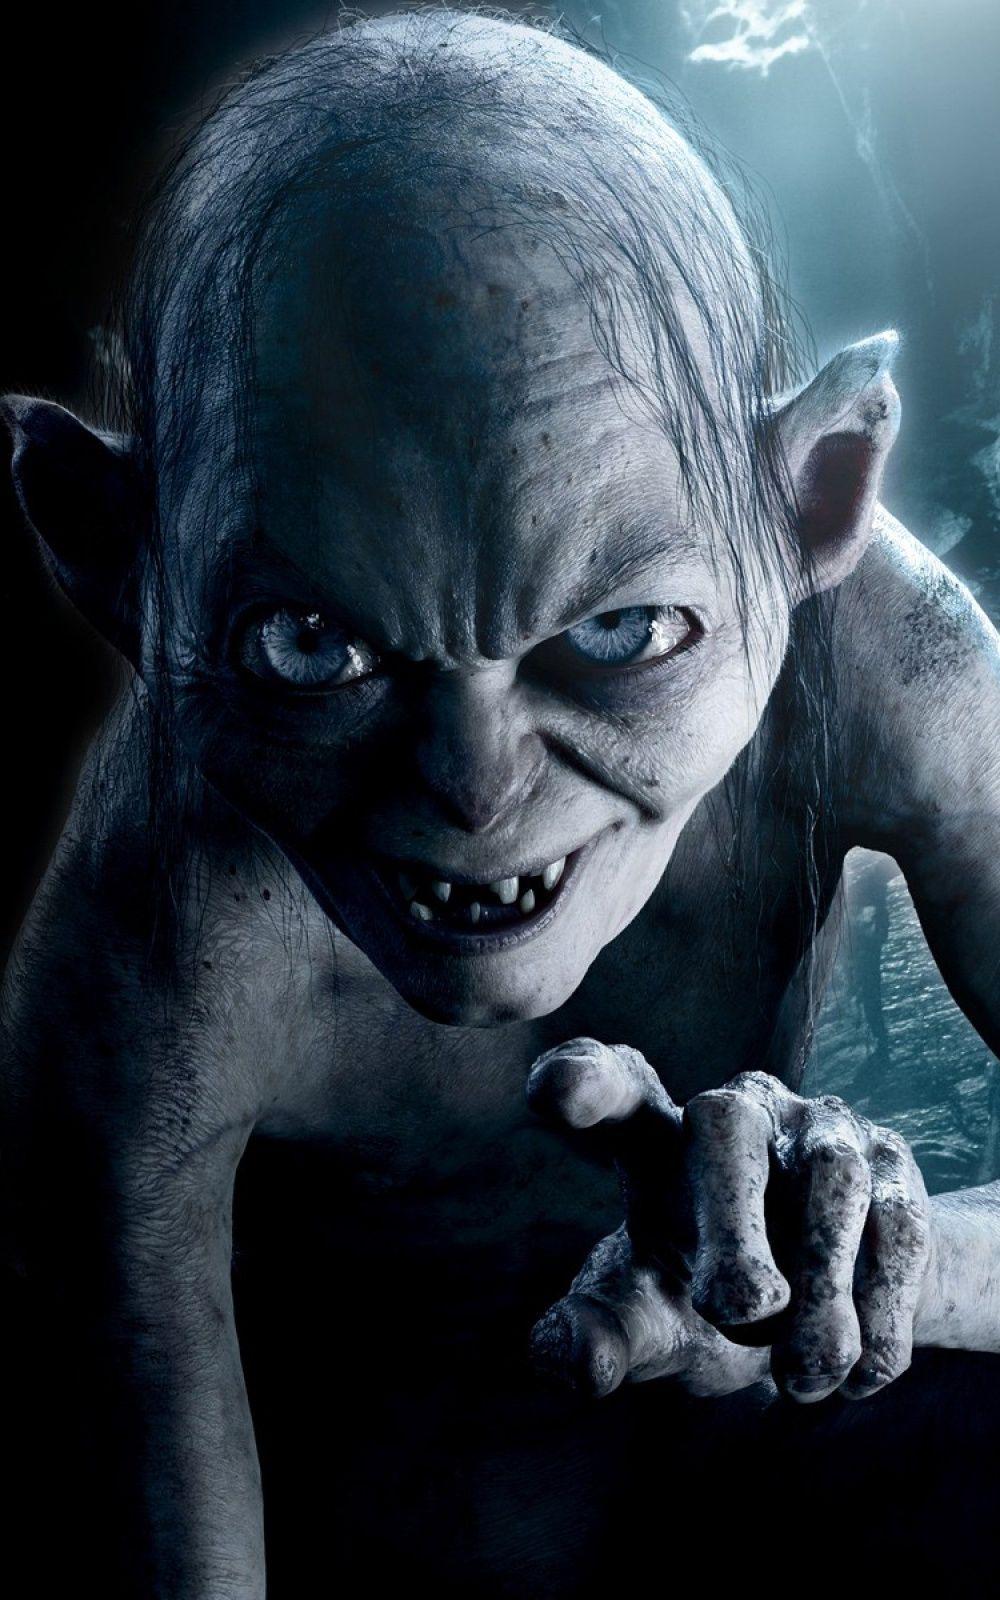 actor of gollum in lord of the rings